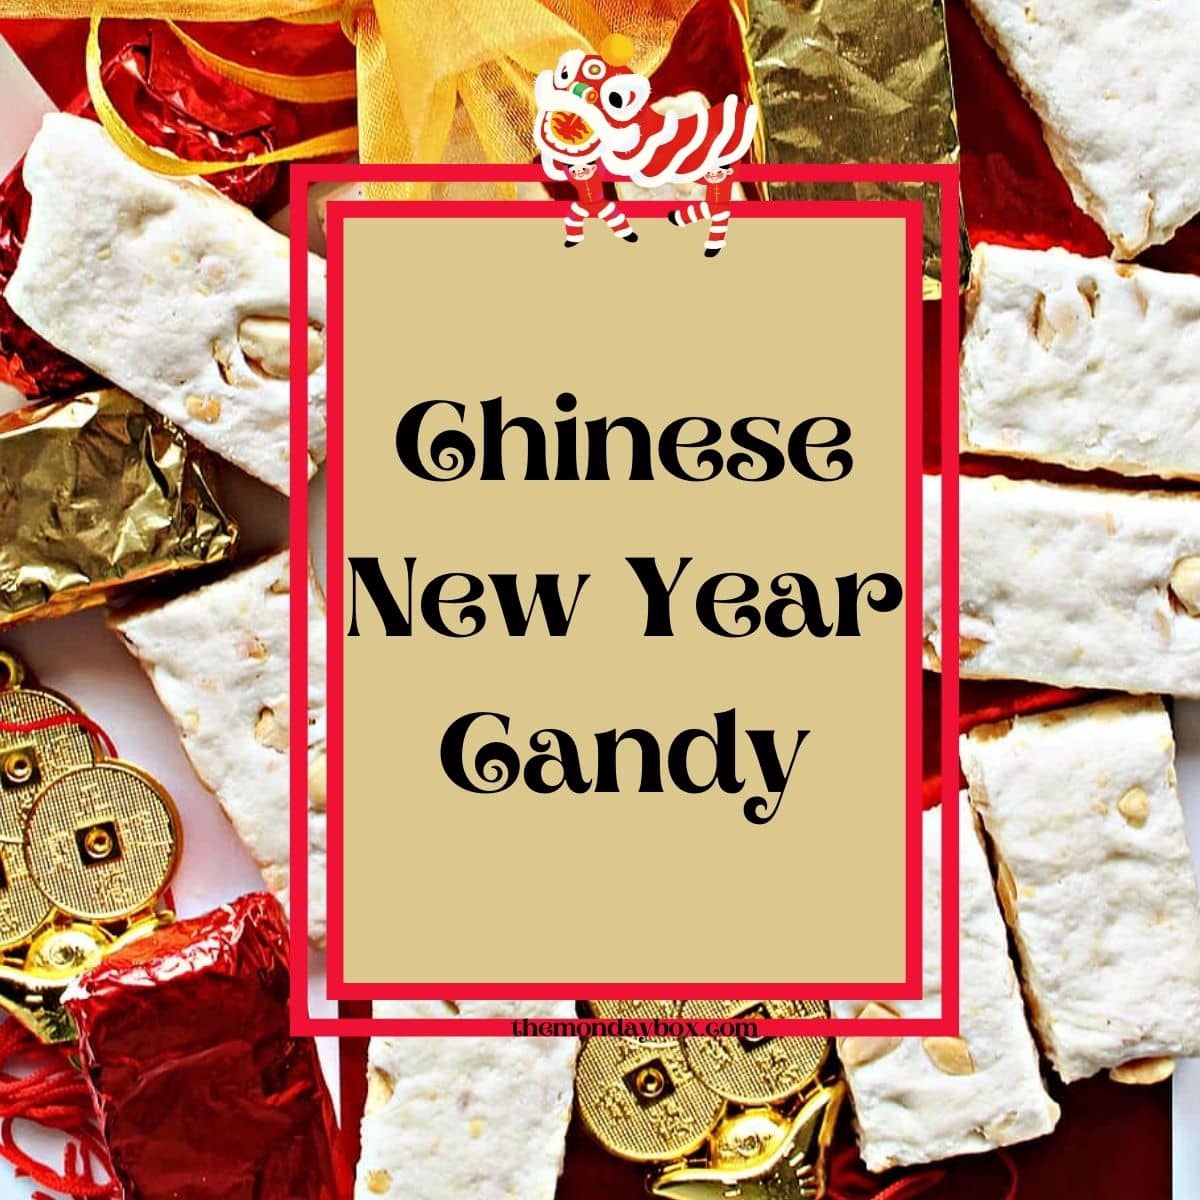 Background milk candy. Foreground text box "Chinese New Year Candy"